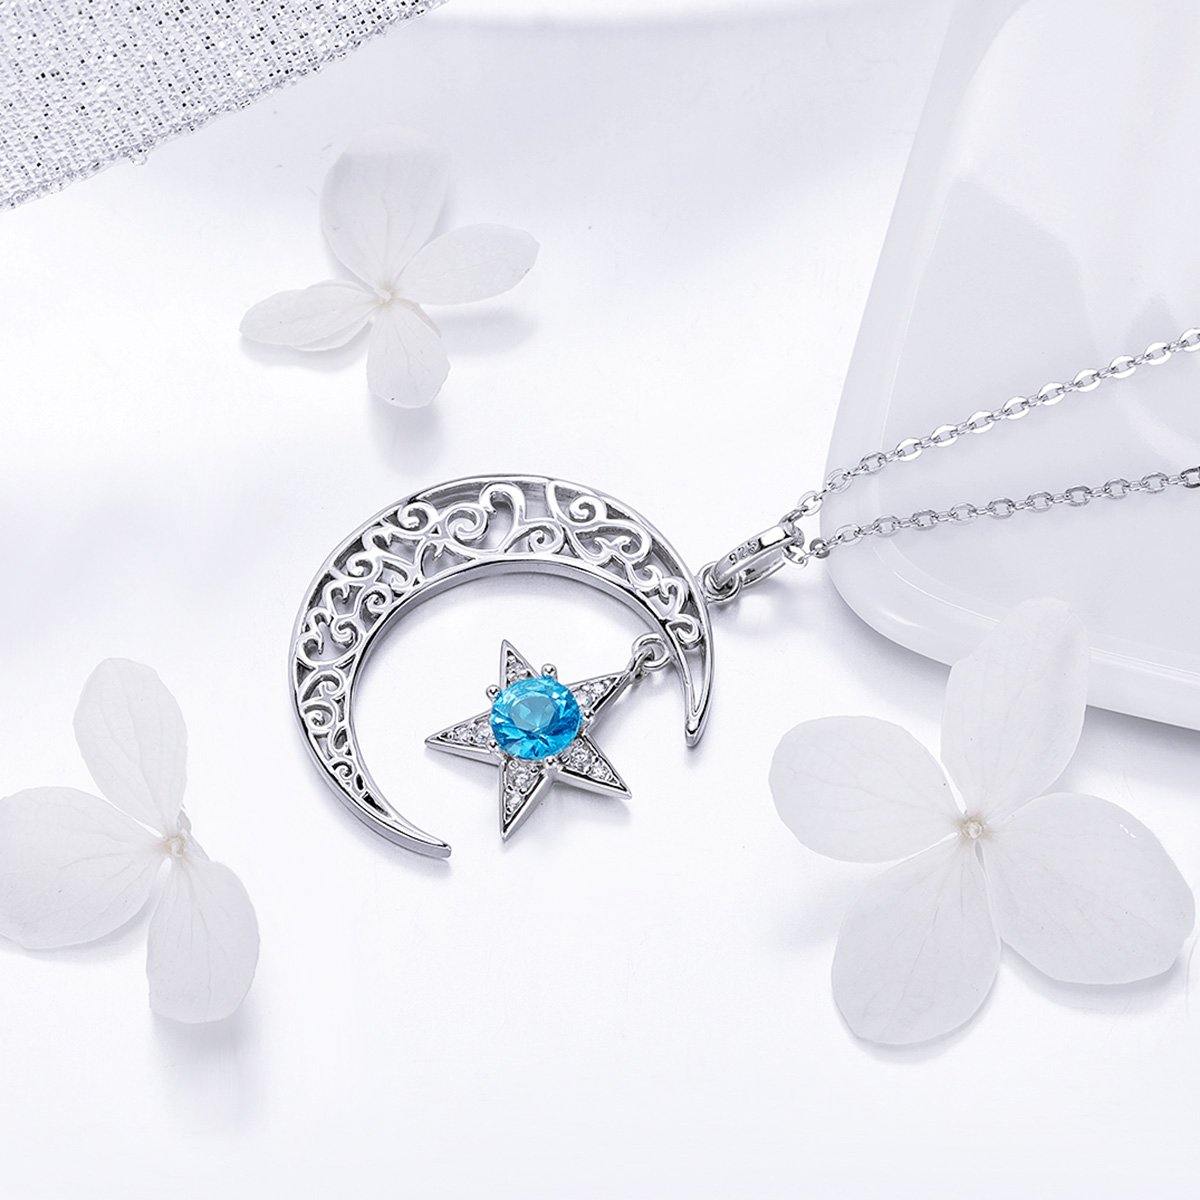 Starry Sky And Moon 925 Sterling Silver Necklace - Aisllin Jewelry